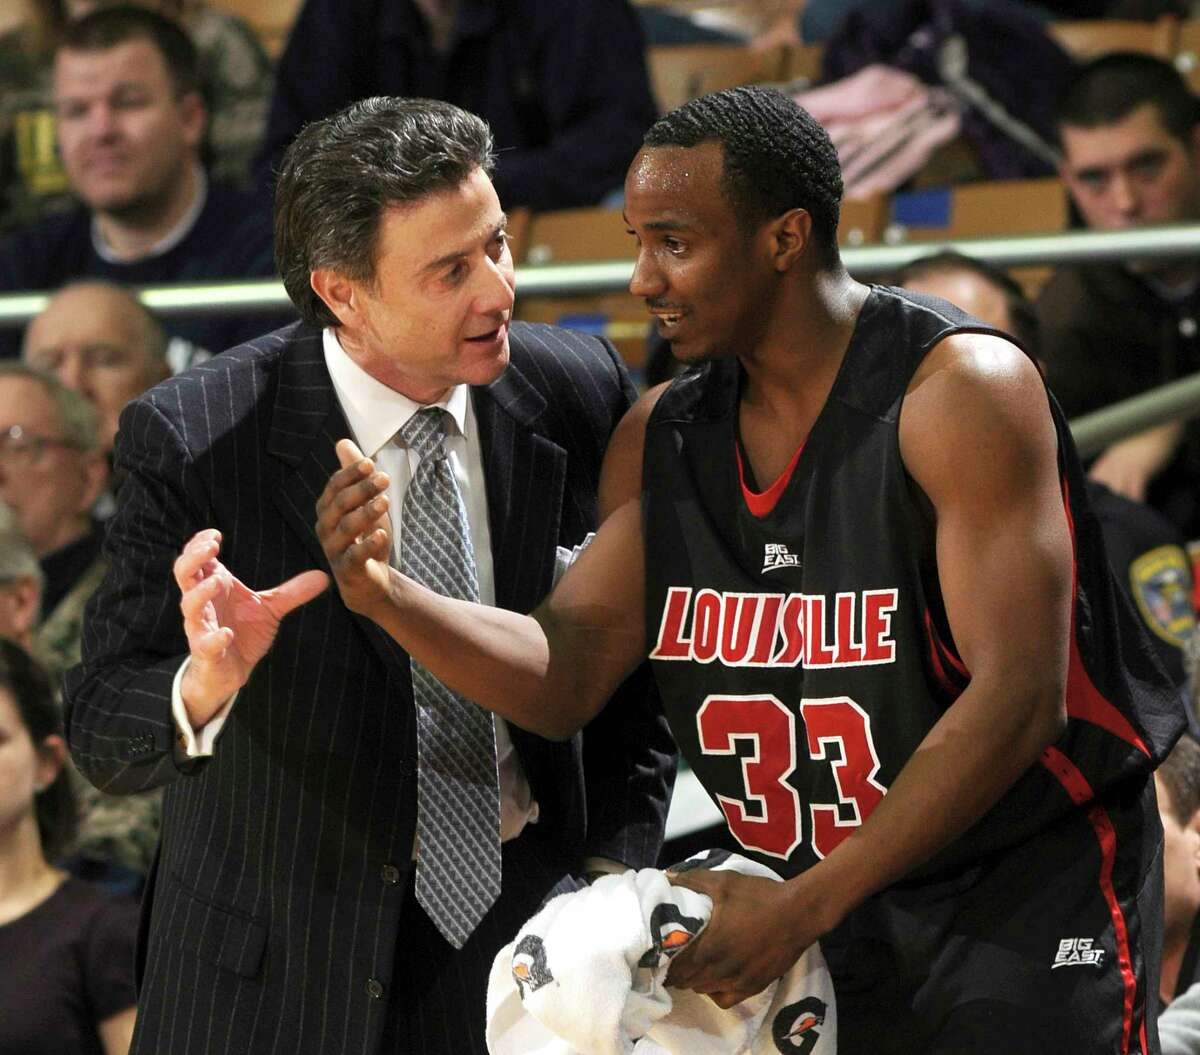 FILE - In this Feb. 12, 2009, file photo Louisville coach Rick Pitino, left, talks with guard Andre McGee during the first half of an NCAA college men's basketball game against Notre Dame in South Bend, Ind. The NCAA suspended Pitino, Thursday, June 15, 2017, for five ACC games following sex scandal investigation. A former men's basketball staffer is alleged to have hired strippers to entertain players and recruits. In addition, the governing body also placed the basketball program on four years' probation, vacated wins in which ineligible players participated and handed down a 10-year show-cause order for former basketball operations director Andre McGee. (AP Photo/Joe Raymond, File)